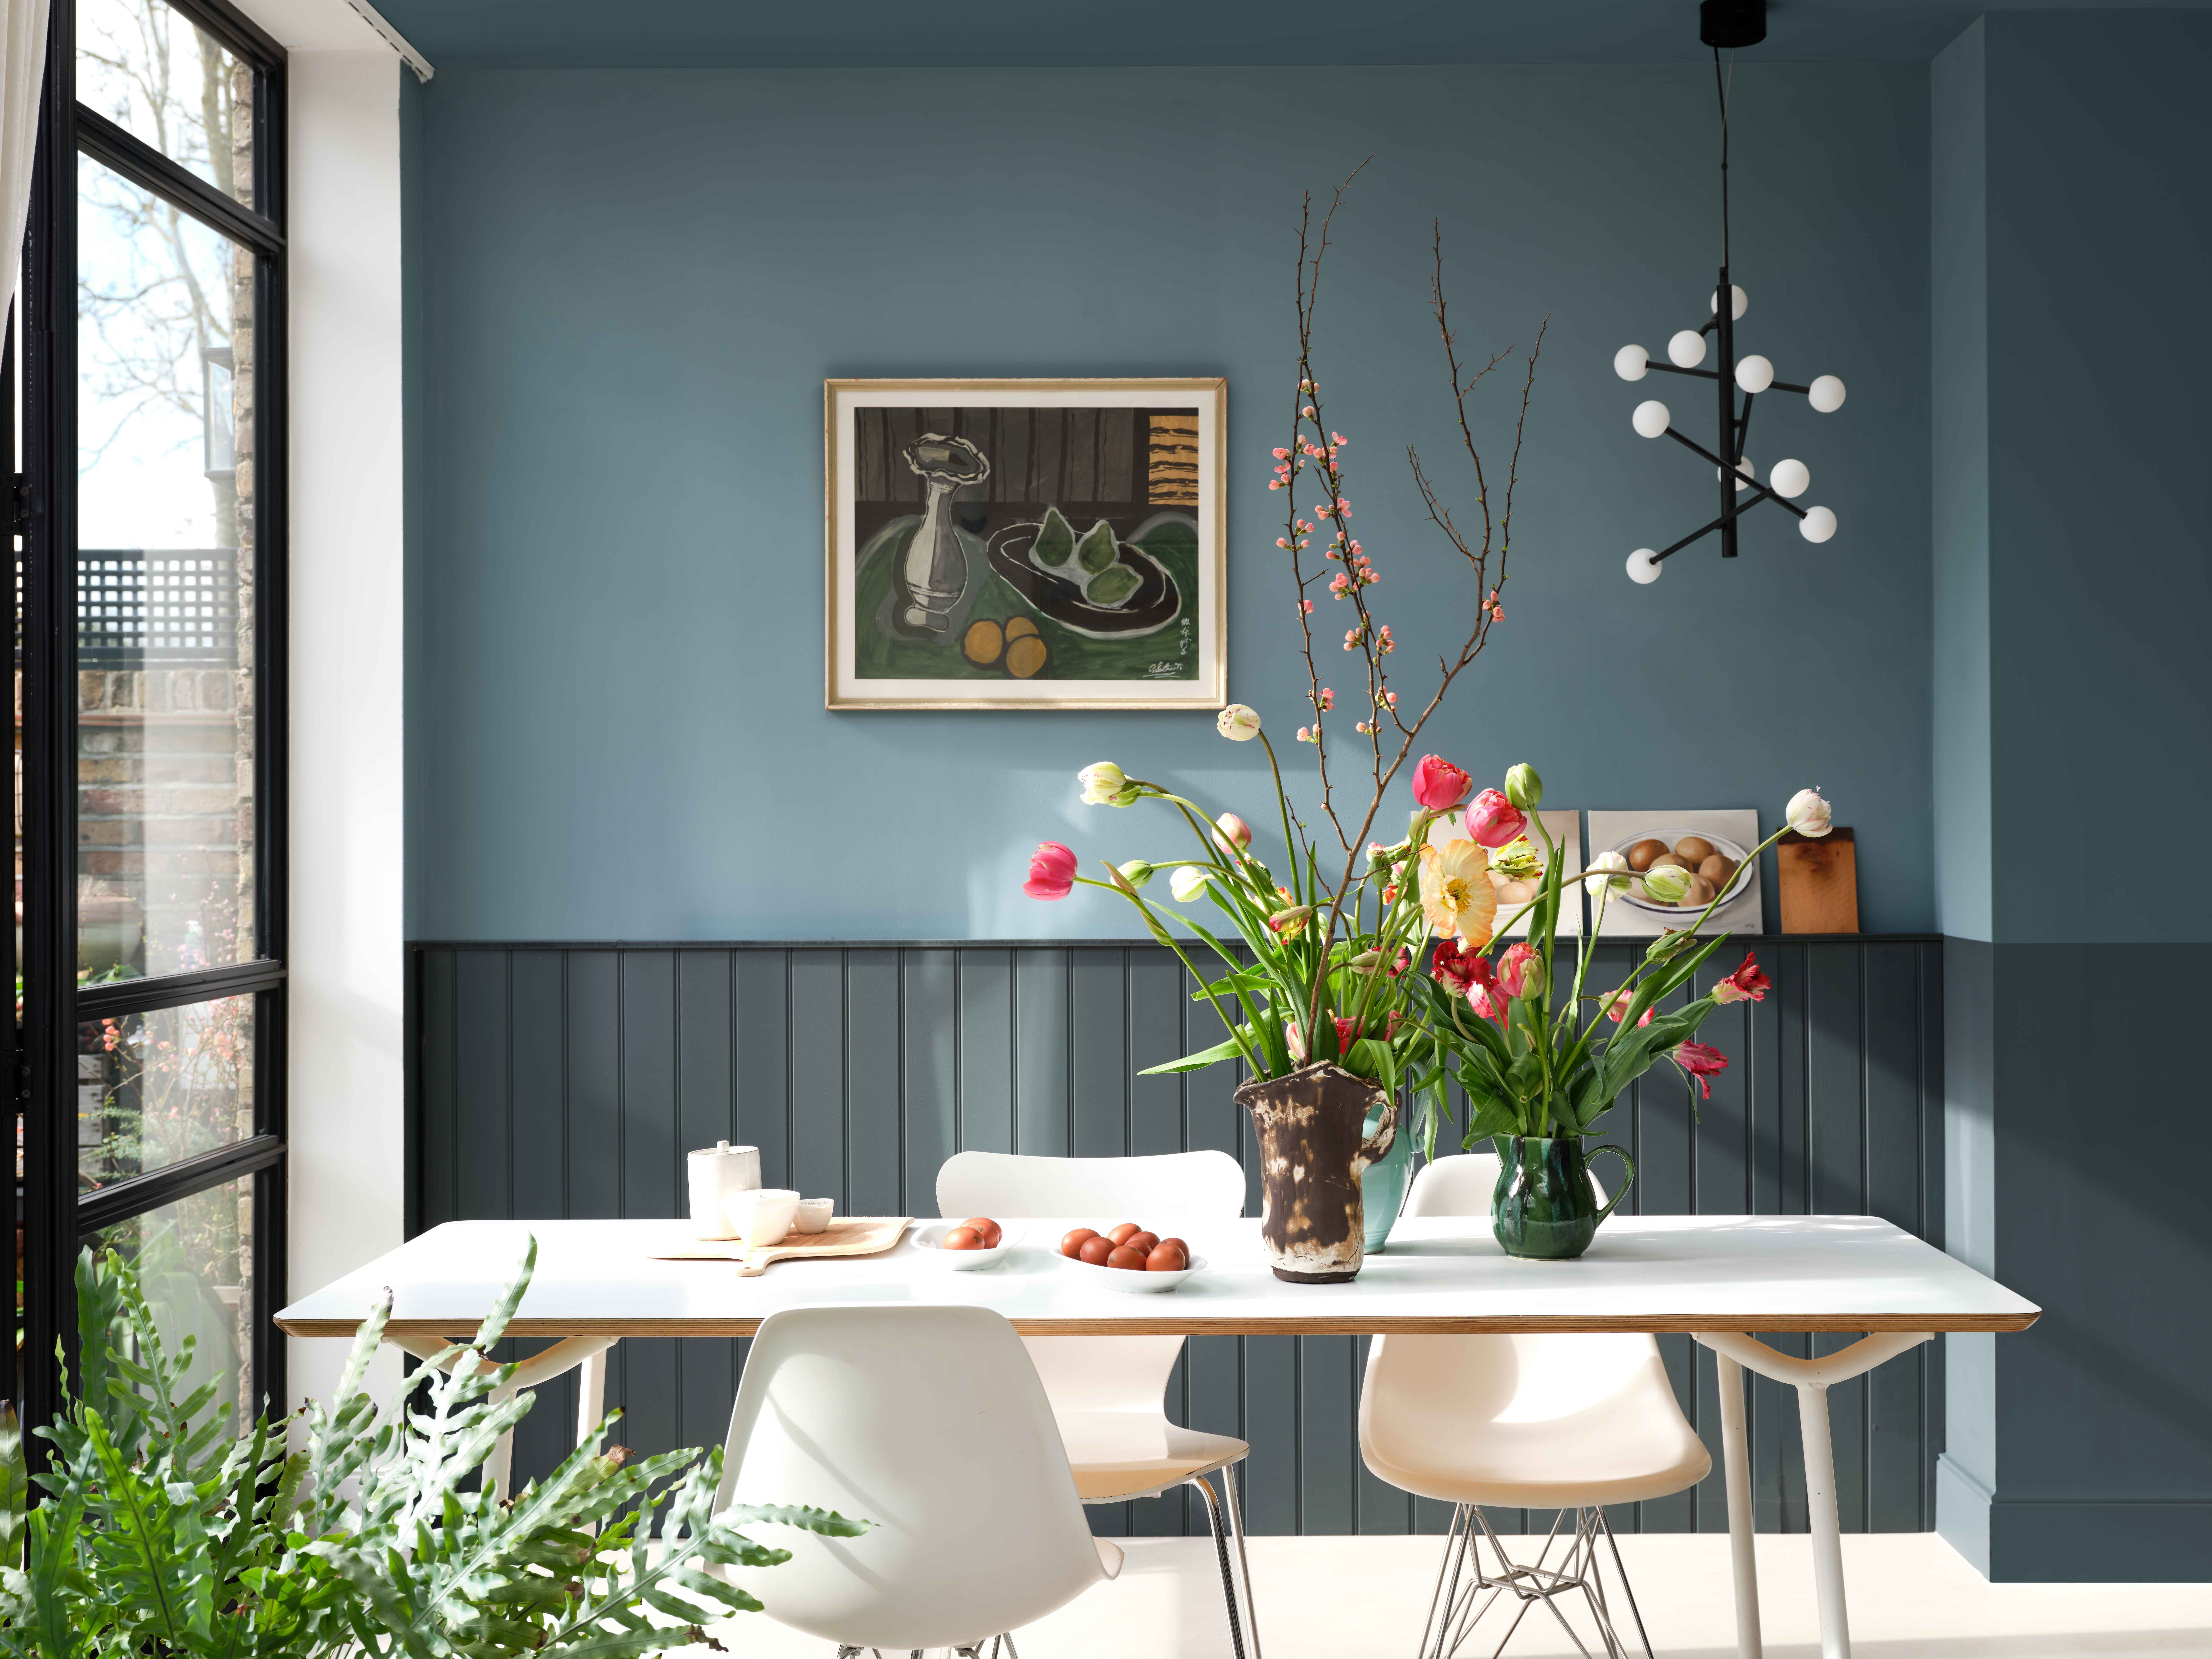 Farrow & Ball Adds 11 Soothing New Colors to Its Lineup